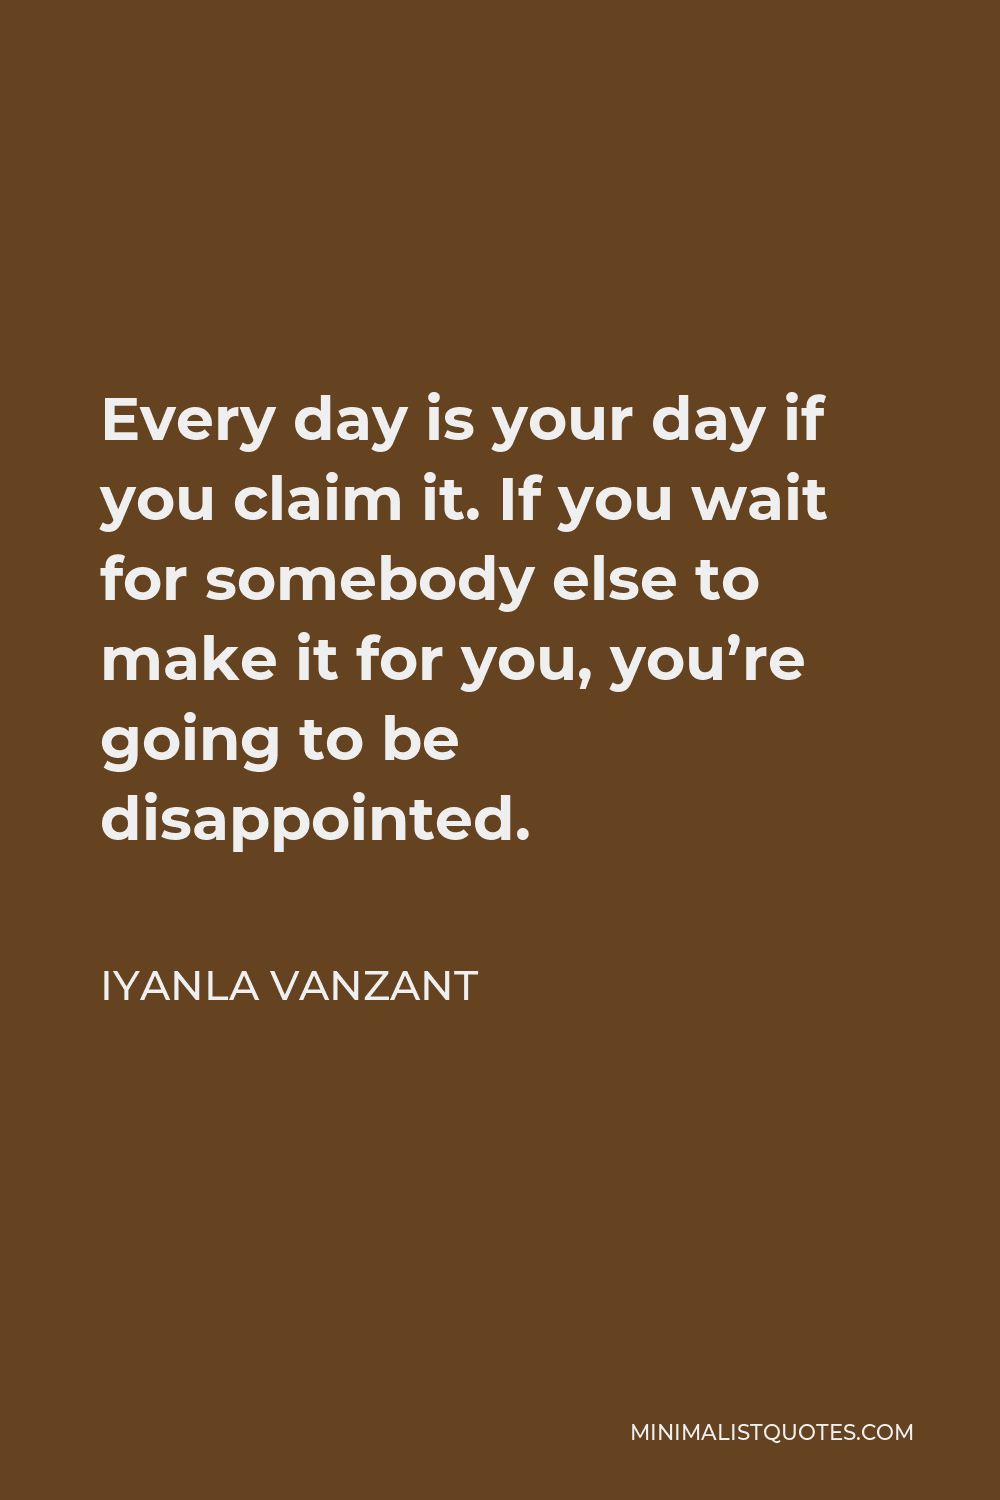 Iyanla Vanzant Quote - Every day is your day if you claim it. If you wait for somebody else to make it for you, you’re going to be disappointed.